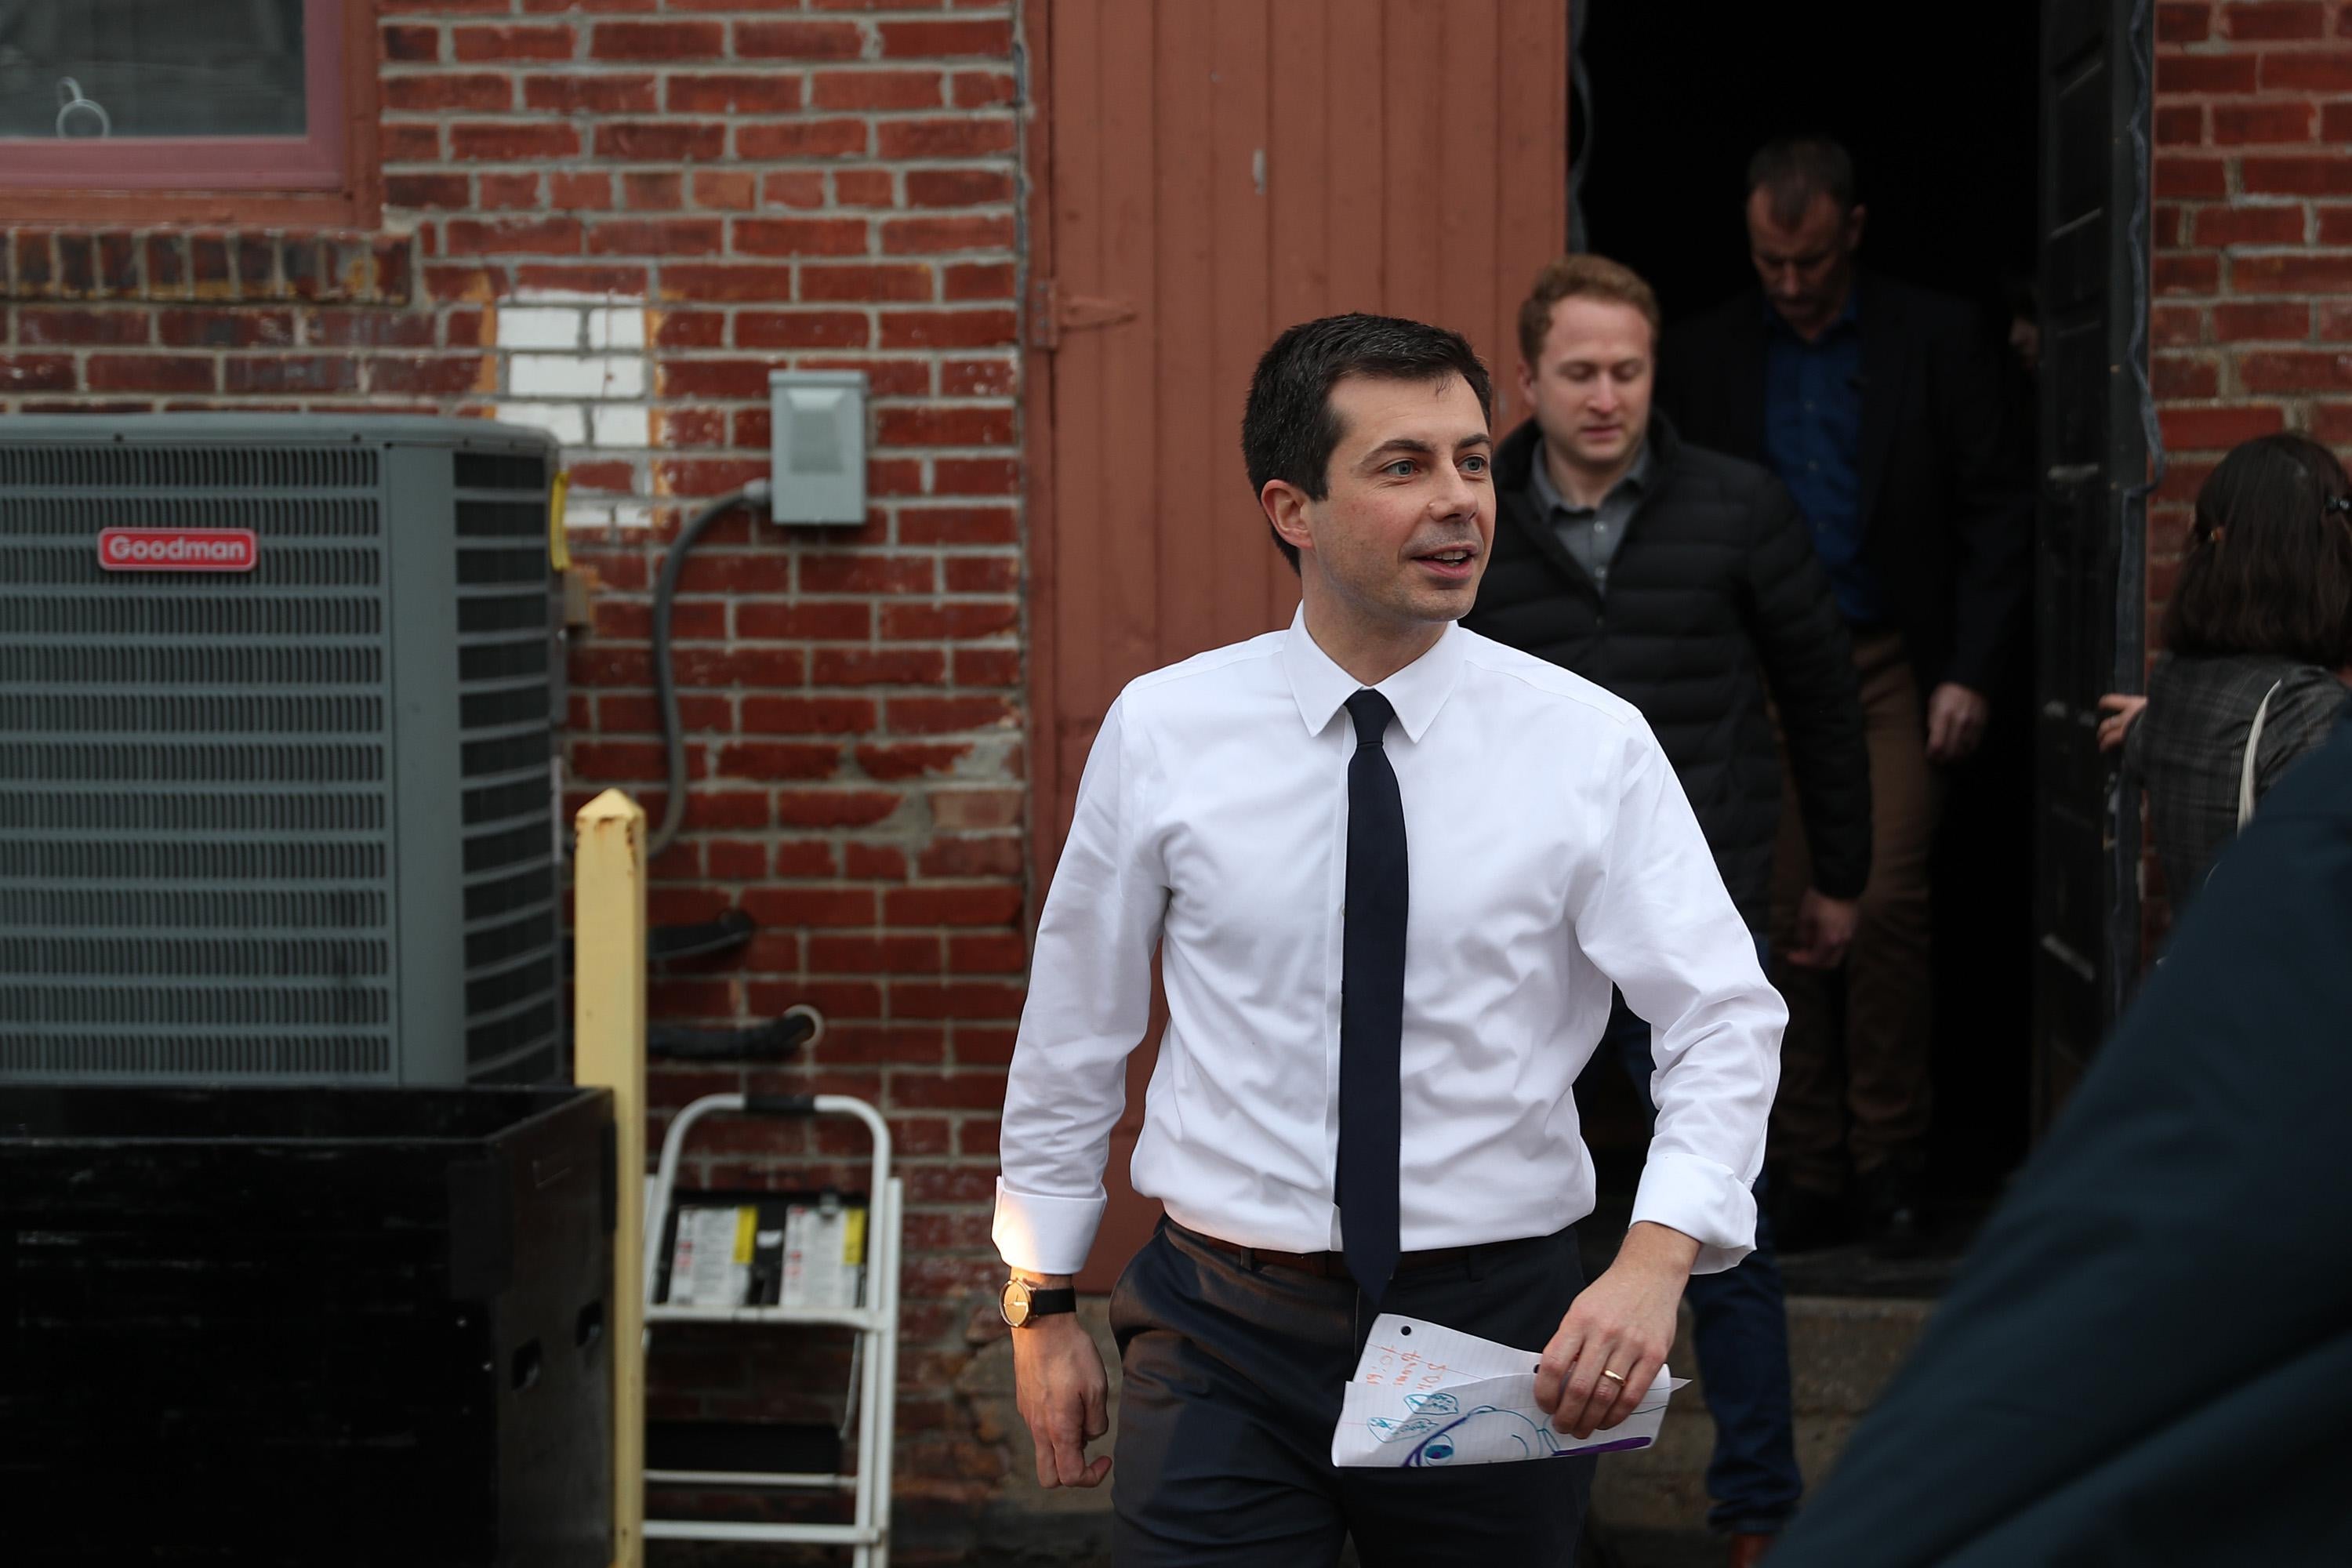 CENTERVILLE, IOWA - DECEMBER 29: Democratic presidential candidate South Bend, Indiana Mayor Pete Buttigieg leaves after holding a campaign event at the Majestic Theater on December 29, 2019 in Centerville, Iowa. The 2020 Iowa Democratic caucuses will take place on February 3, 2020, making it the first nominating contest for the Democratic Party in choosing their presidential candidate to face Donald Trump in the 2020 election.  (Photo by Joe Raedle/Getty Images)